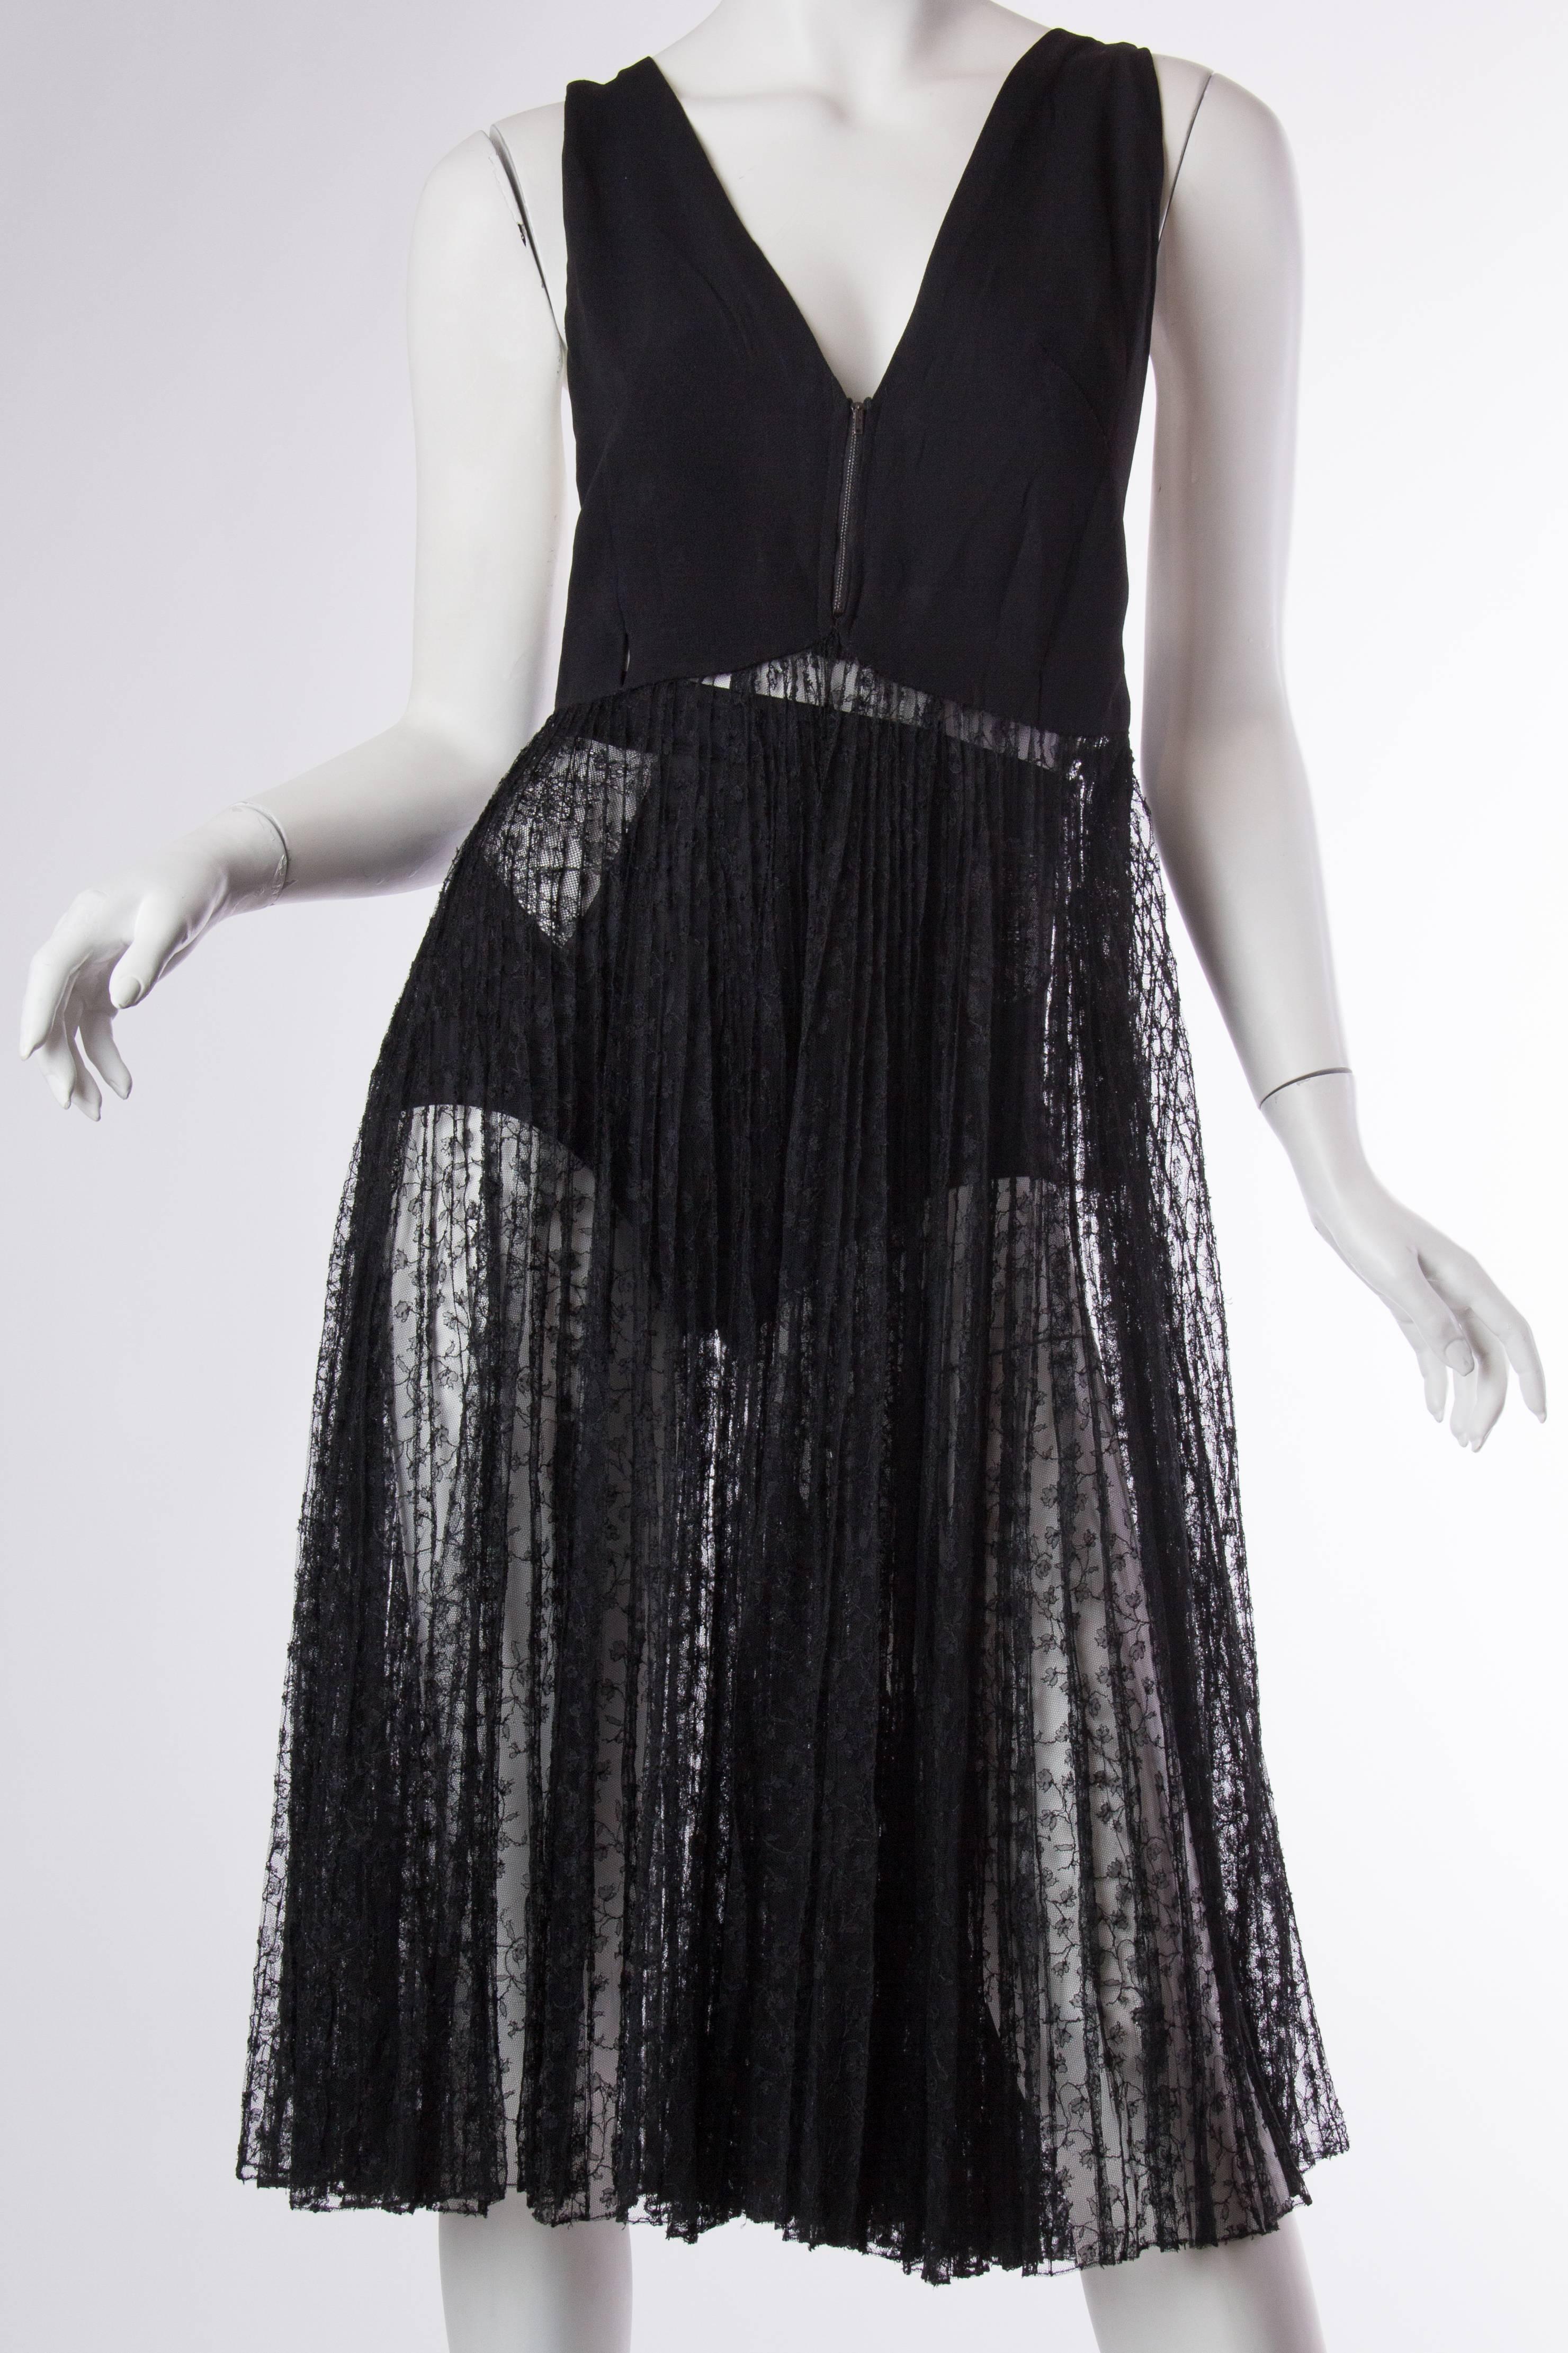 1930s and 1970s rebuilt and married together sheer vintage black lace dress and cut out back  

the skirt of this dress is made from 1930s lace.  The 1970s racer back lace finishes the back.